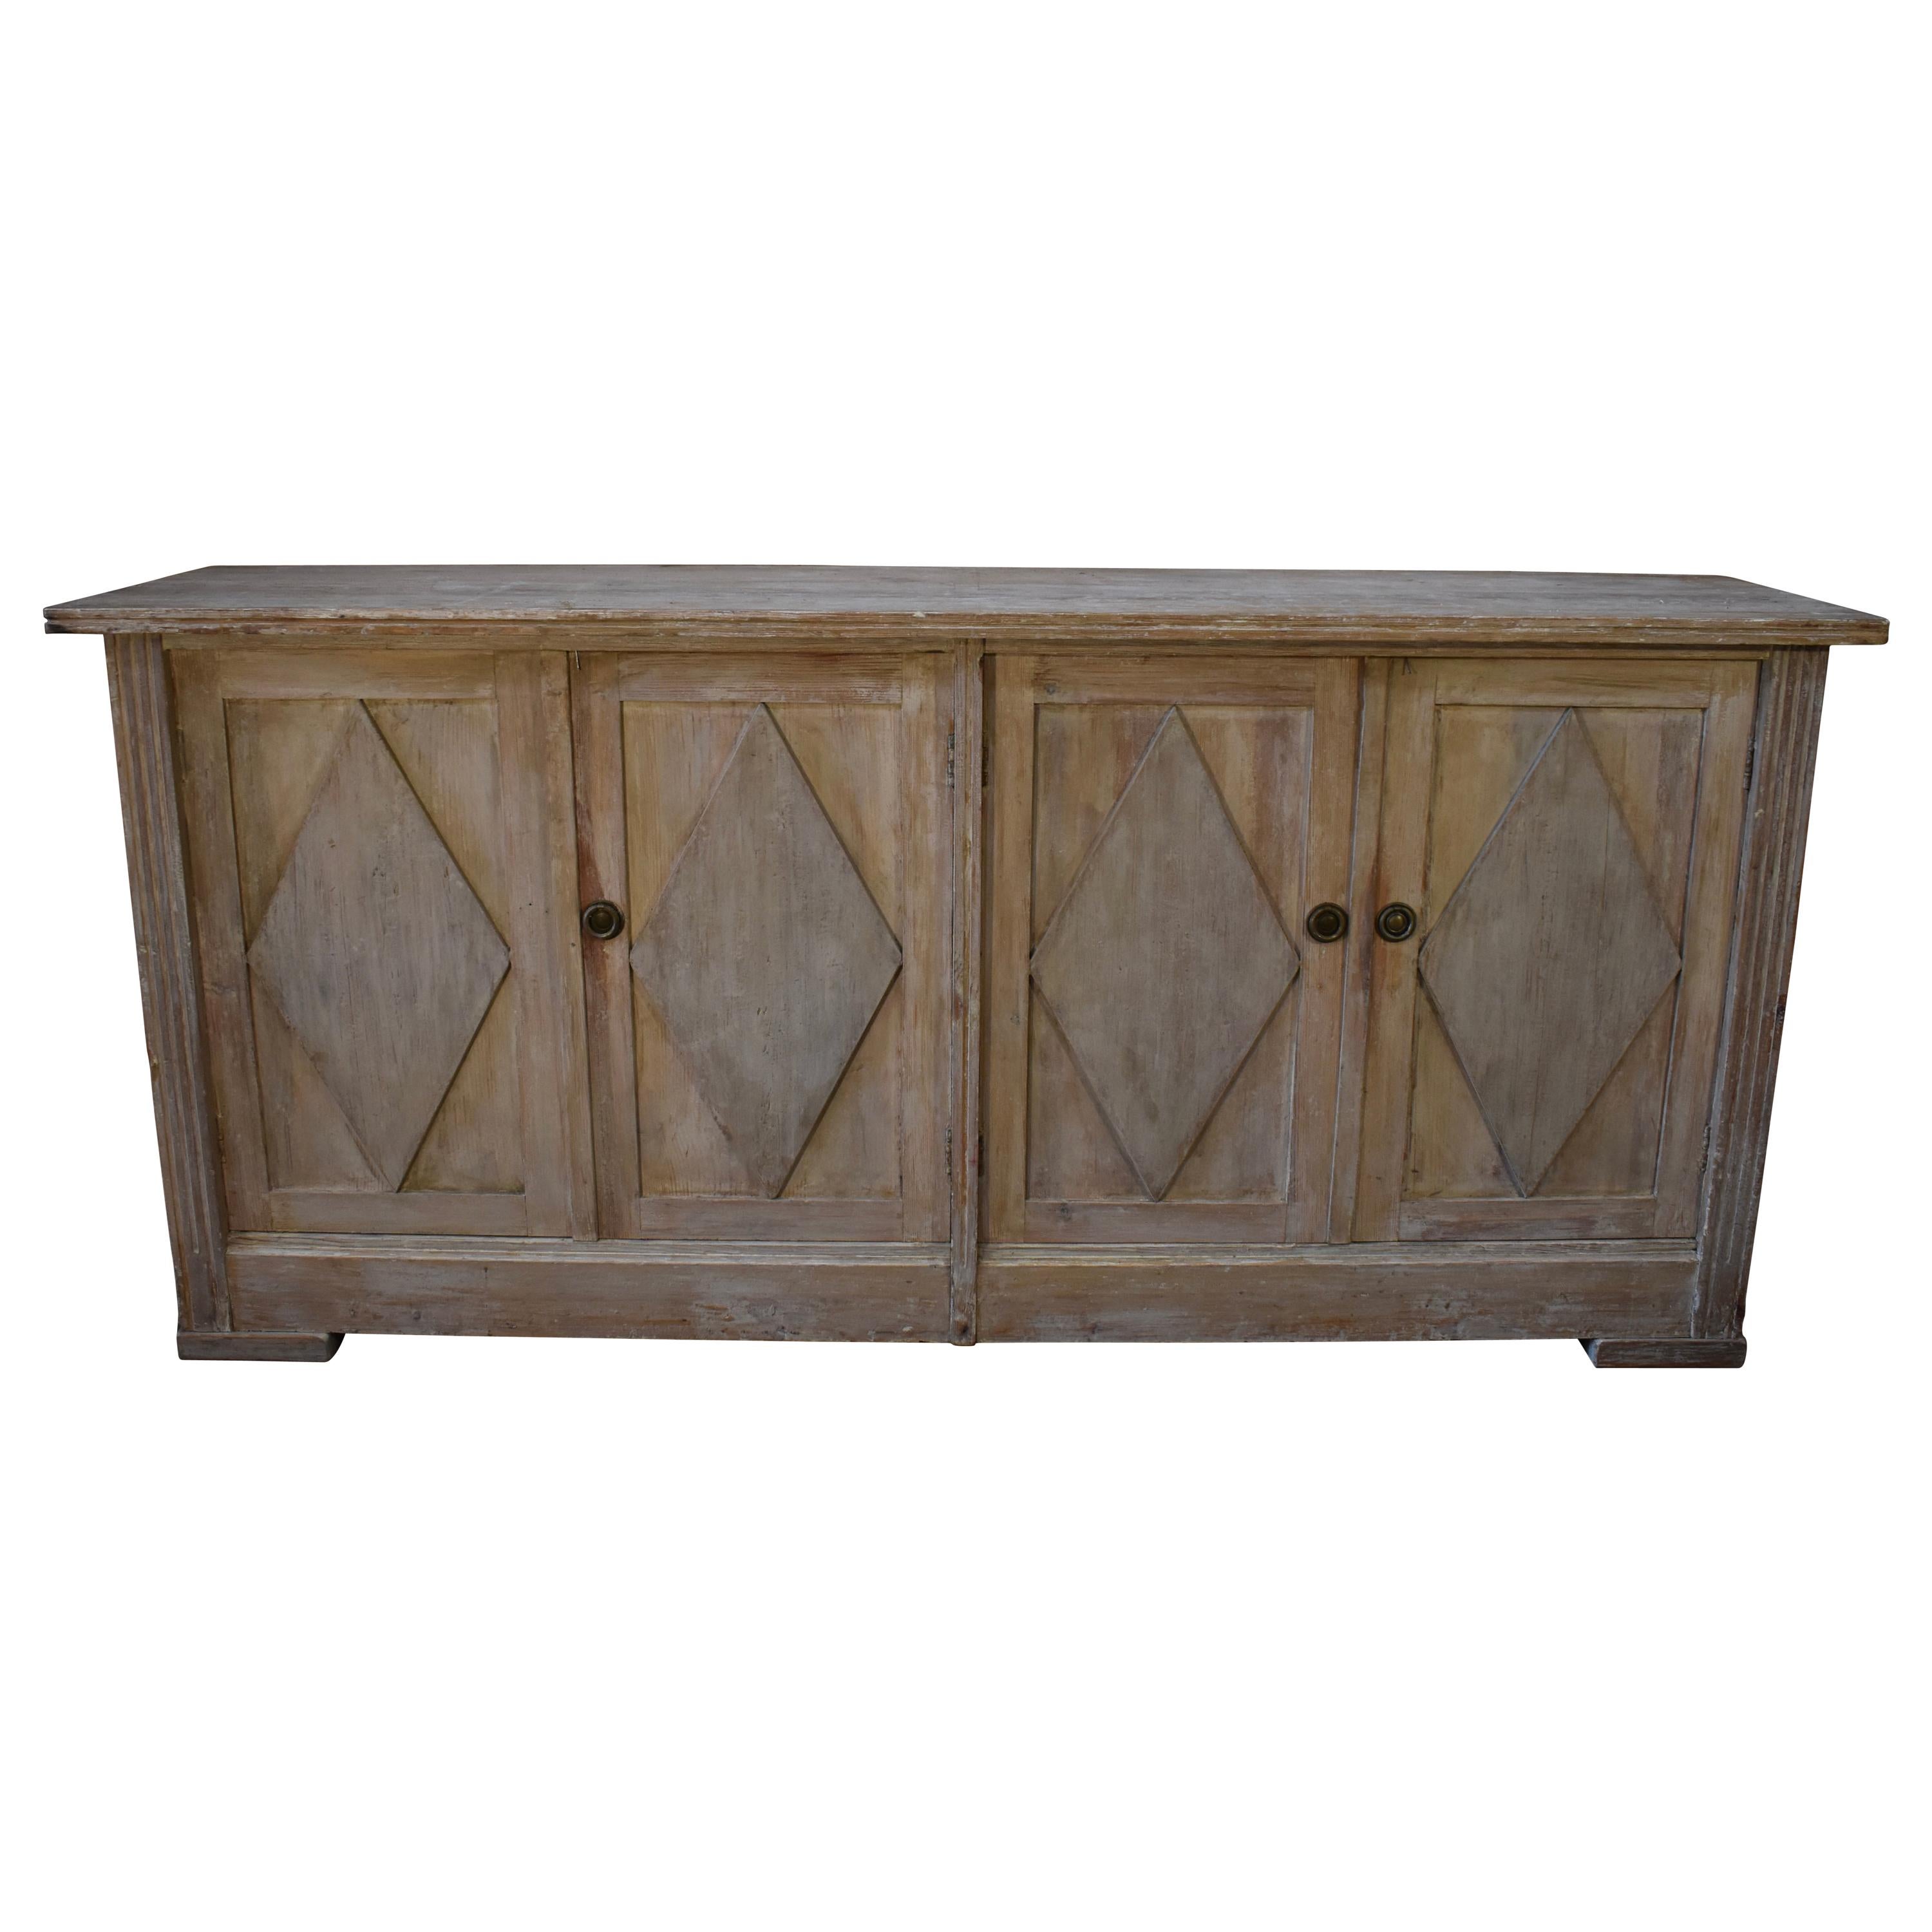 19th Century Swedish Four-Door Sideboard or Enfilade For Sale